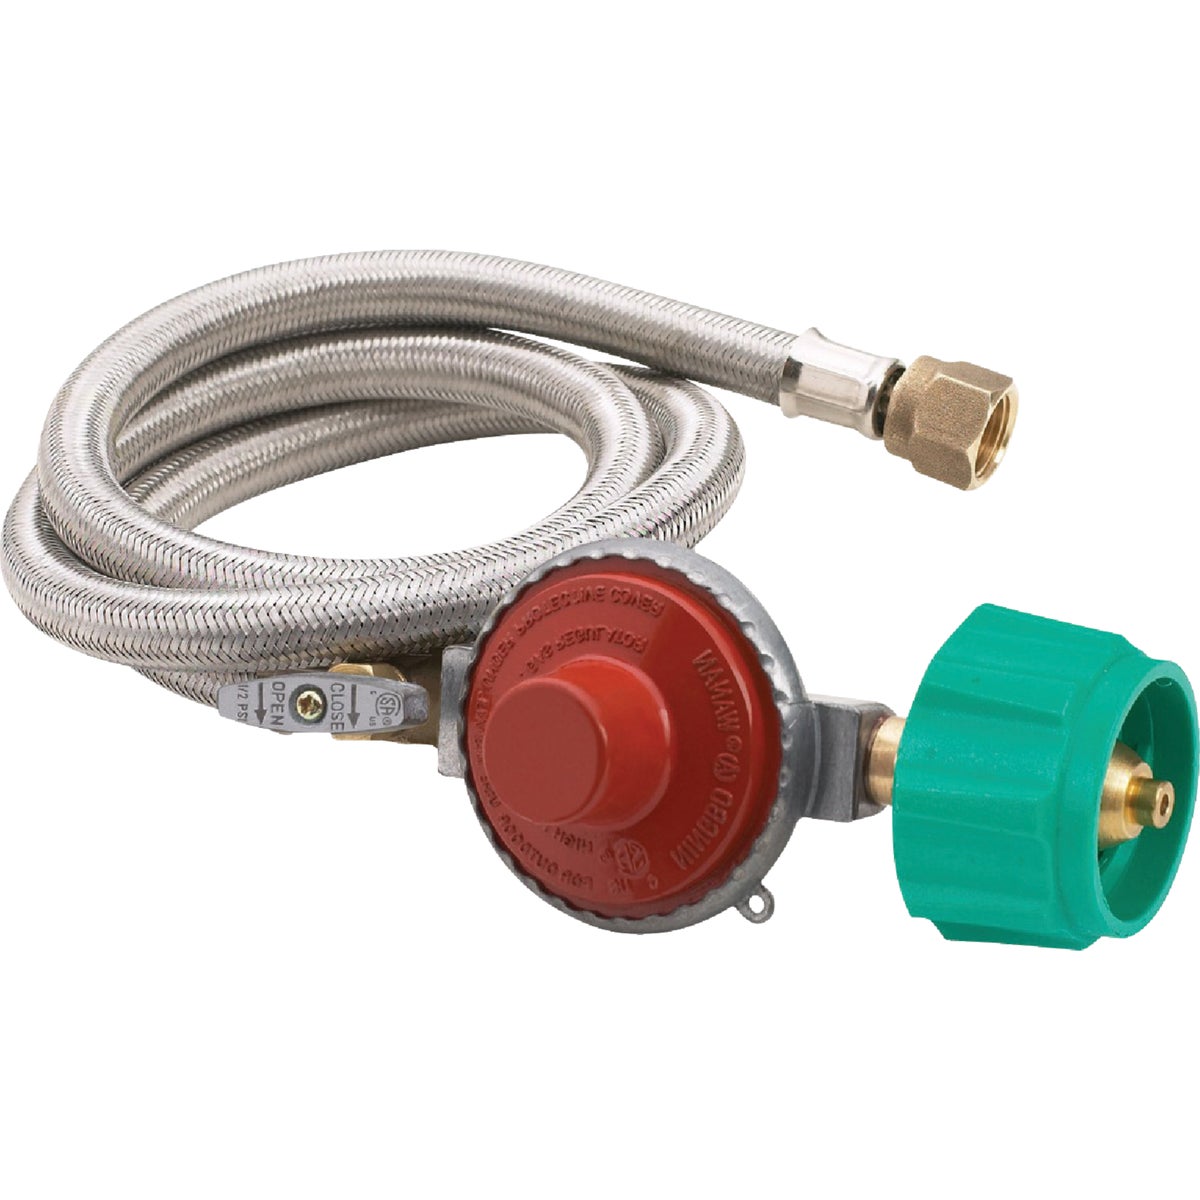 Item 803677, 4 Ft. stainless braided hose with 10 psi preset regulator.